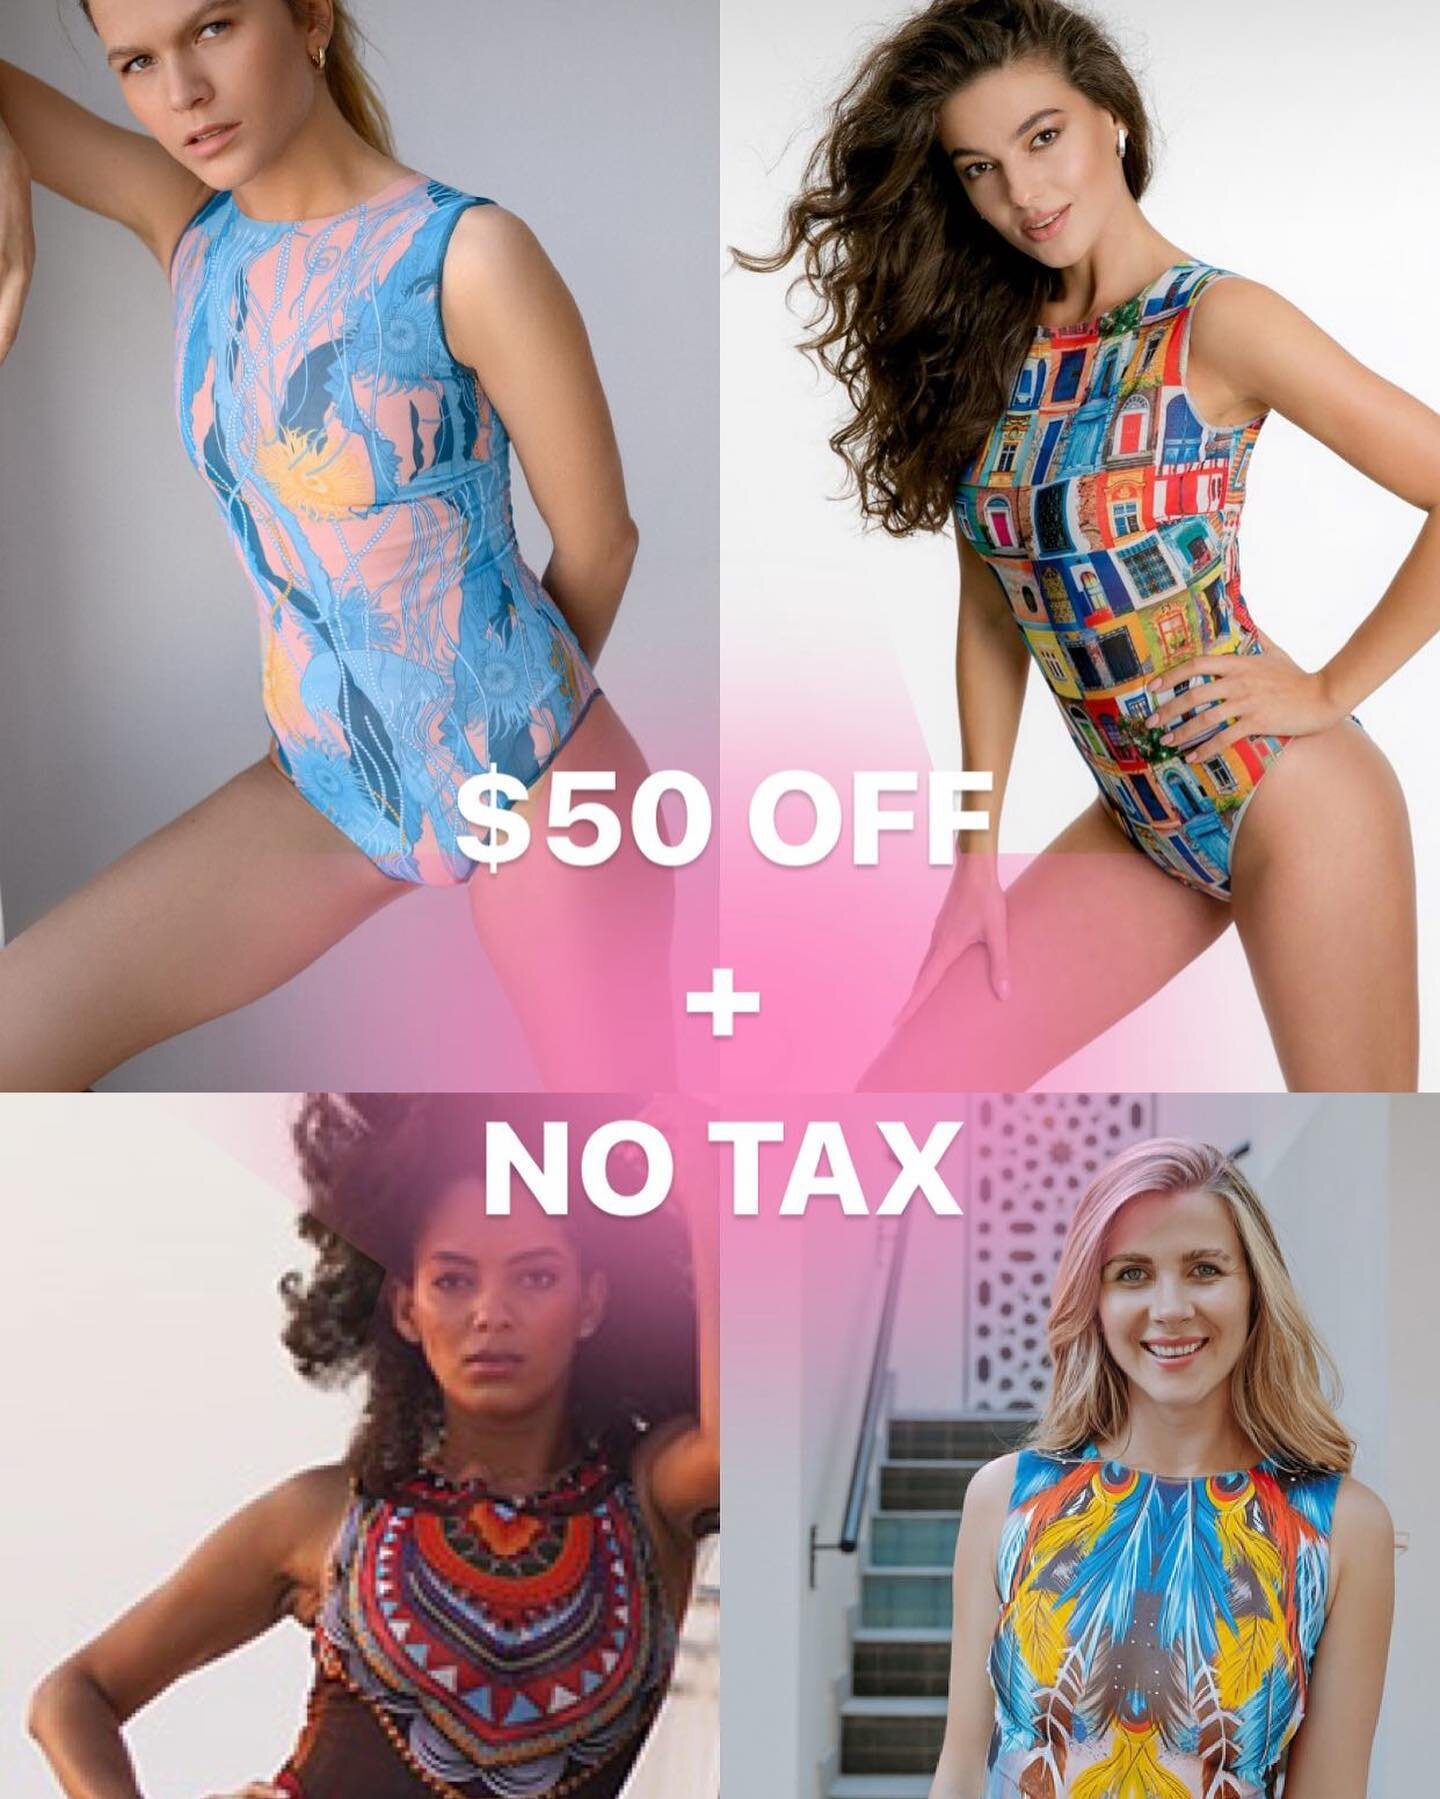 🔥 FLASH SALE 🔥 SAVE UP TO $100 on TAN-THROUGH ONE-PIECE WITH NO SLEEVES models. 💌 MESSAGE US FOR ANY QUESTION 🔥🔥🔥